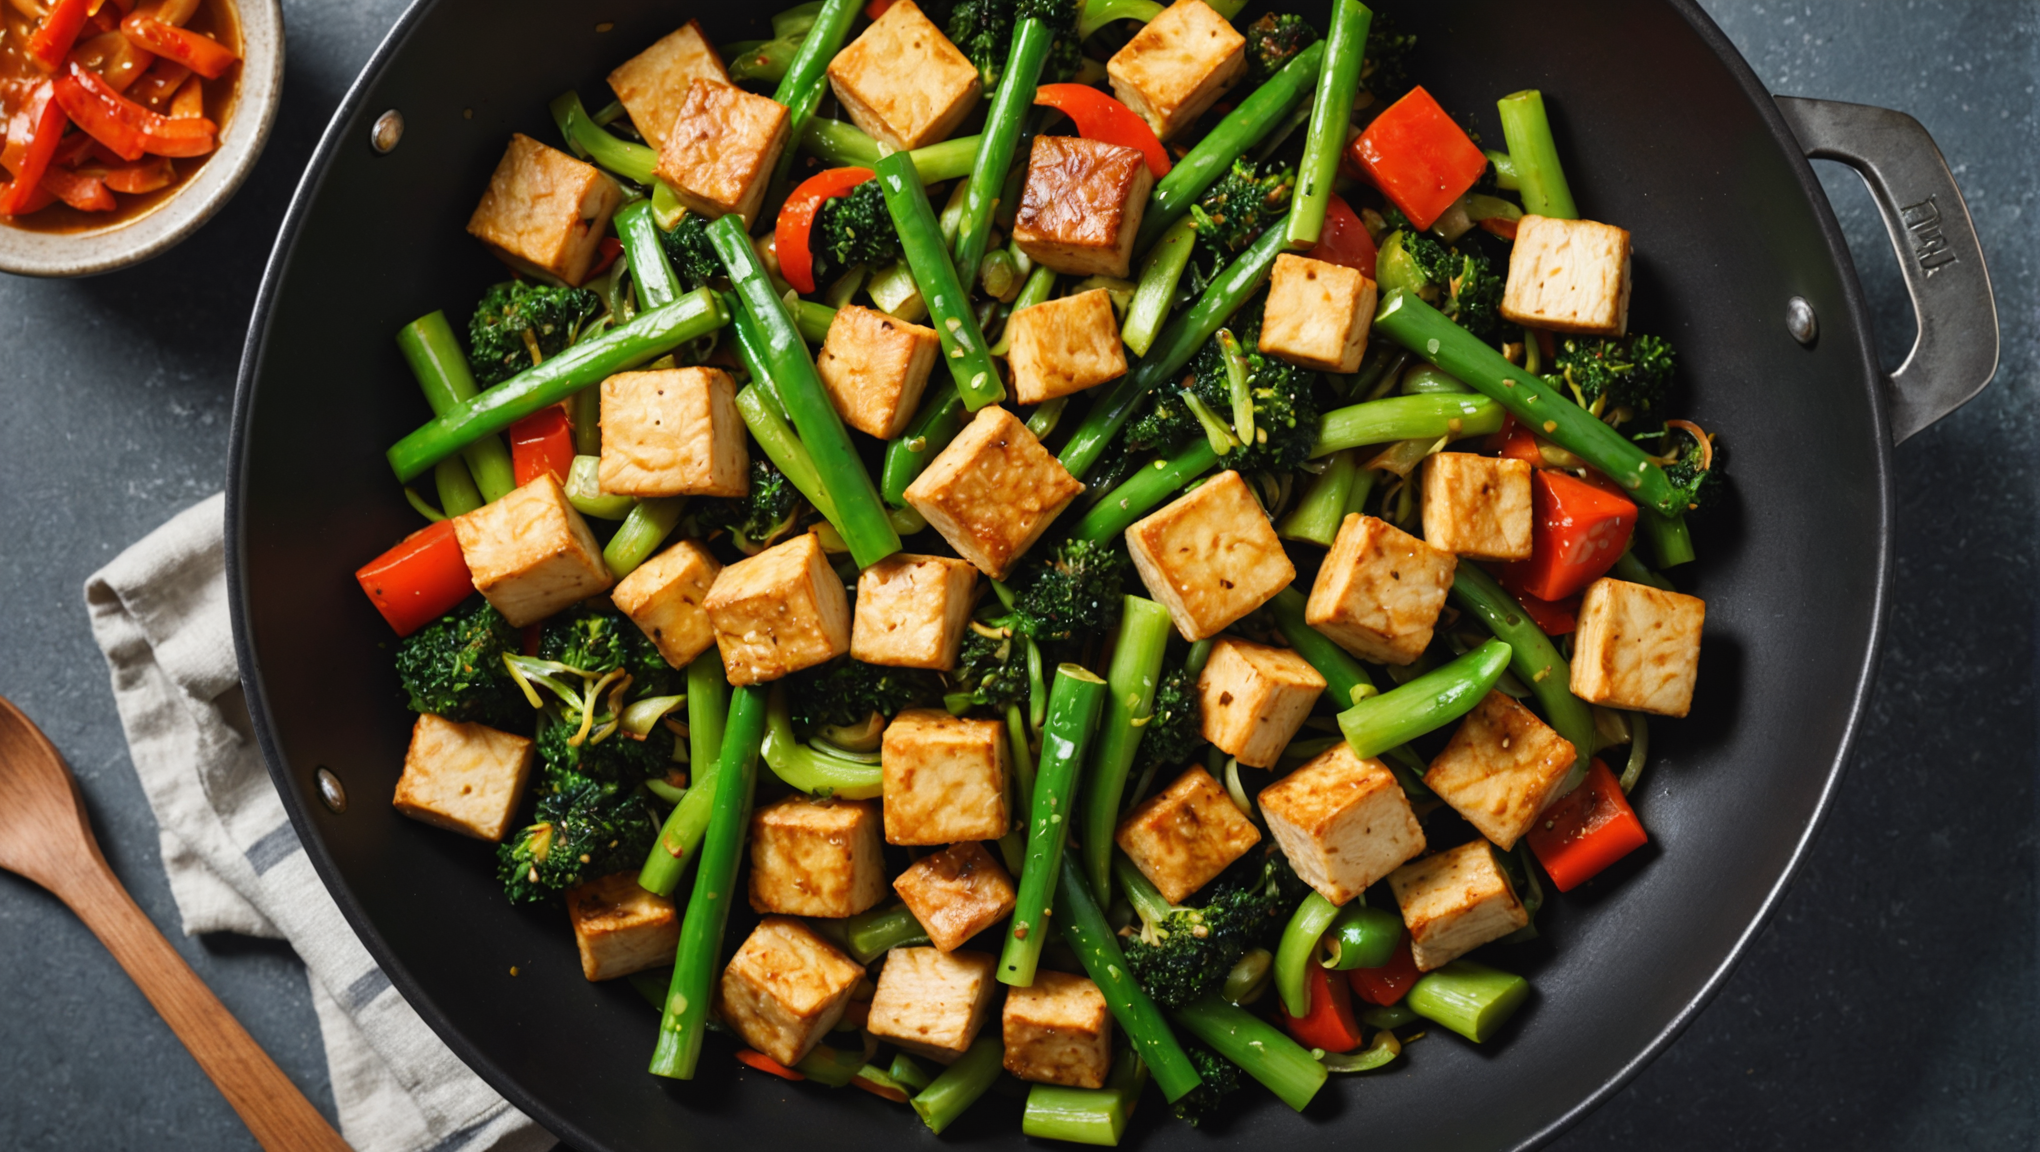 Vegan Stir-fry with Welsh Onions and Tofu